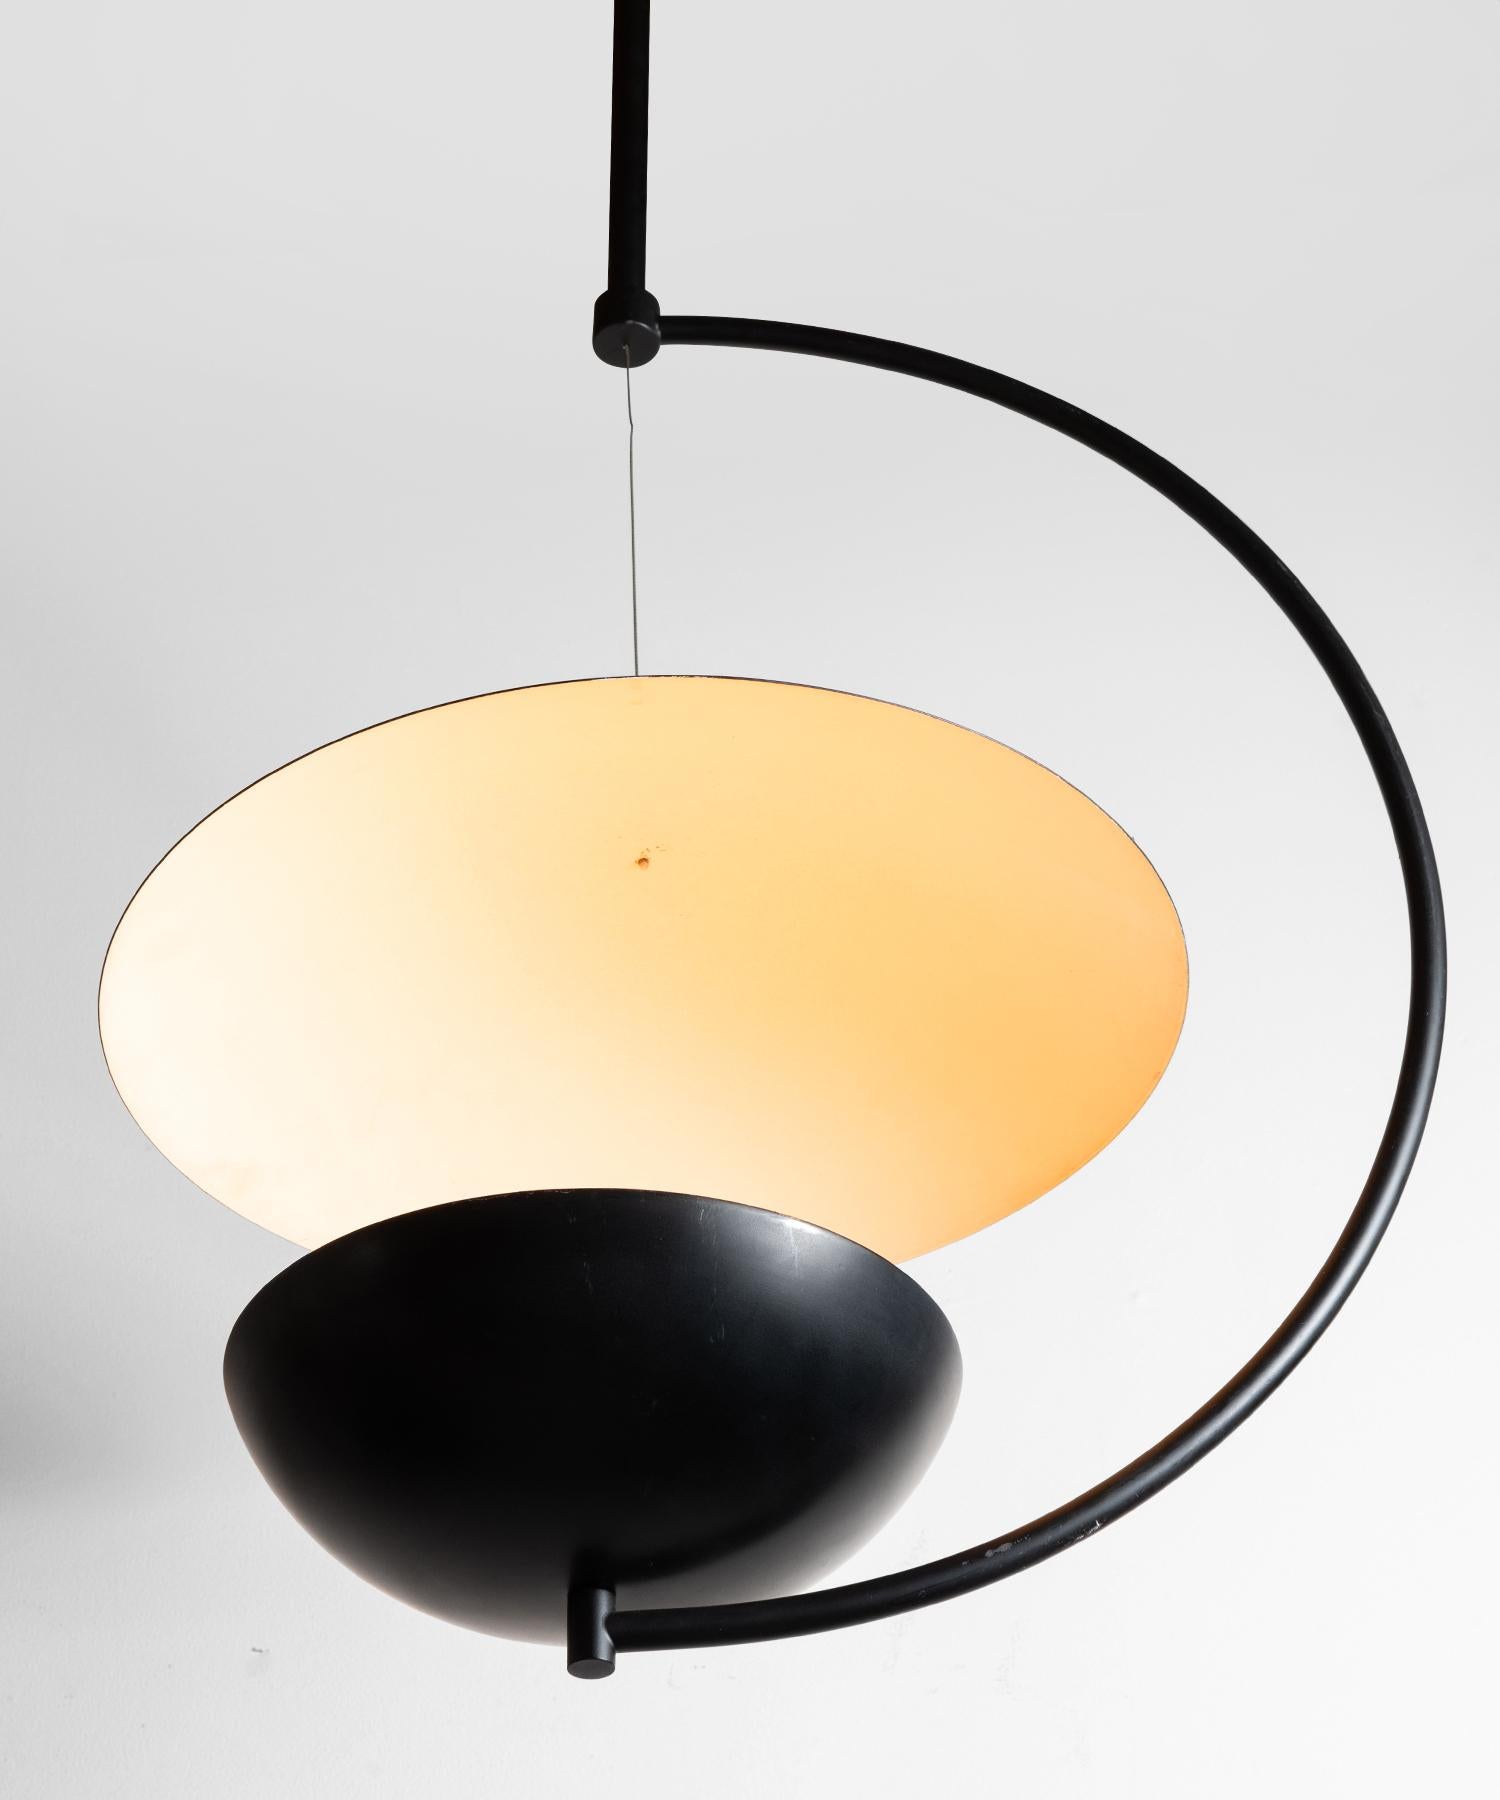 Crescent shaped modern pendant with hanging reflector disc.

 